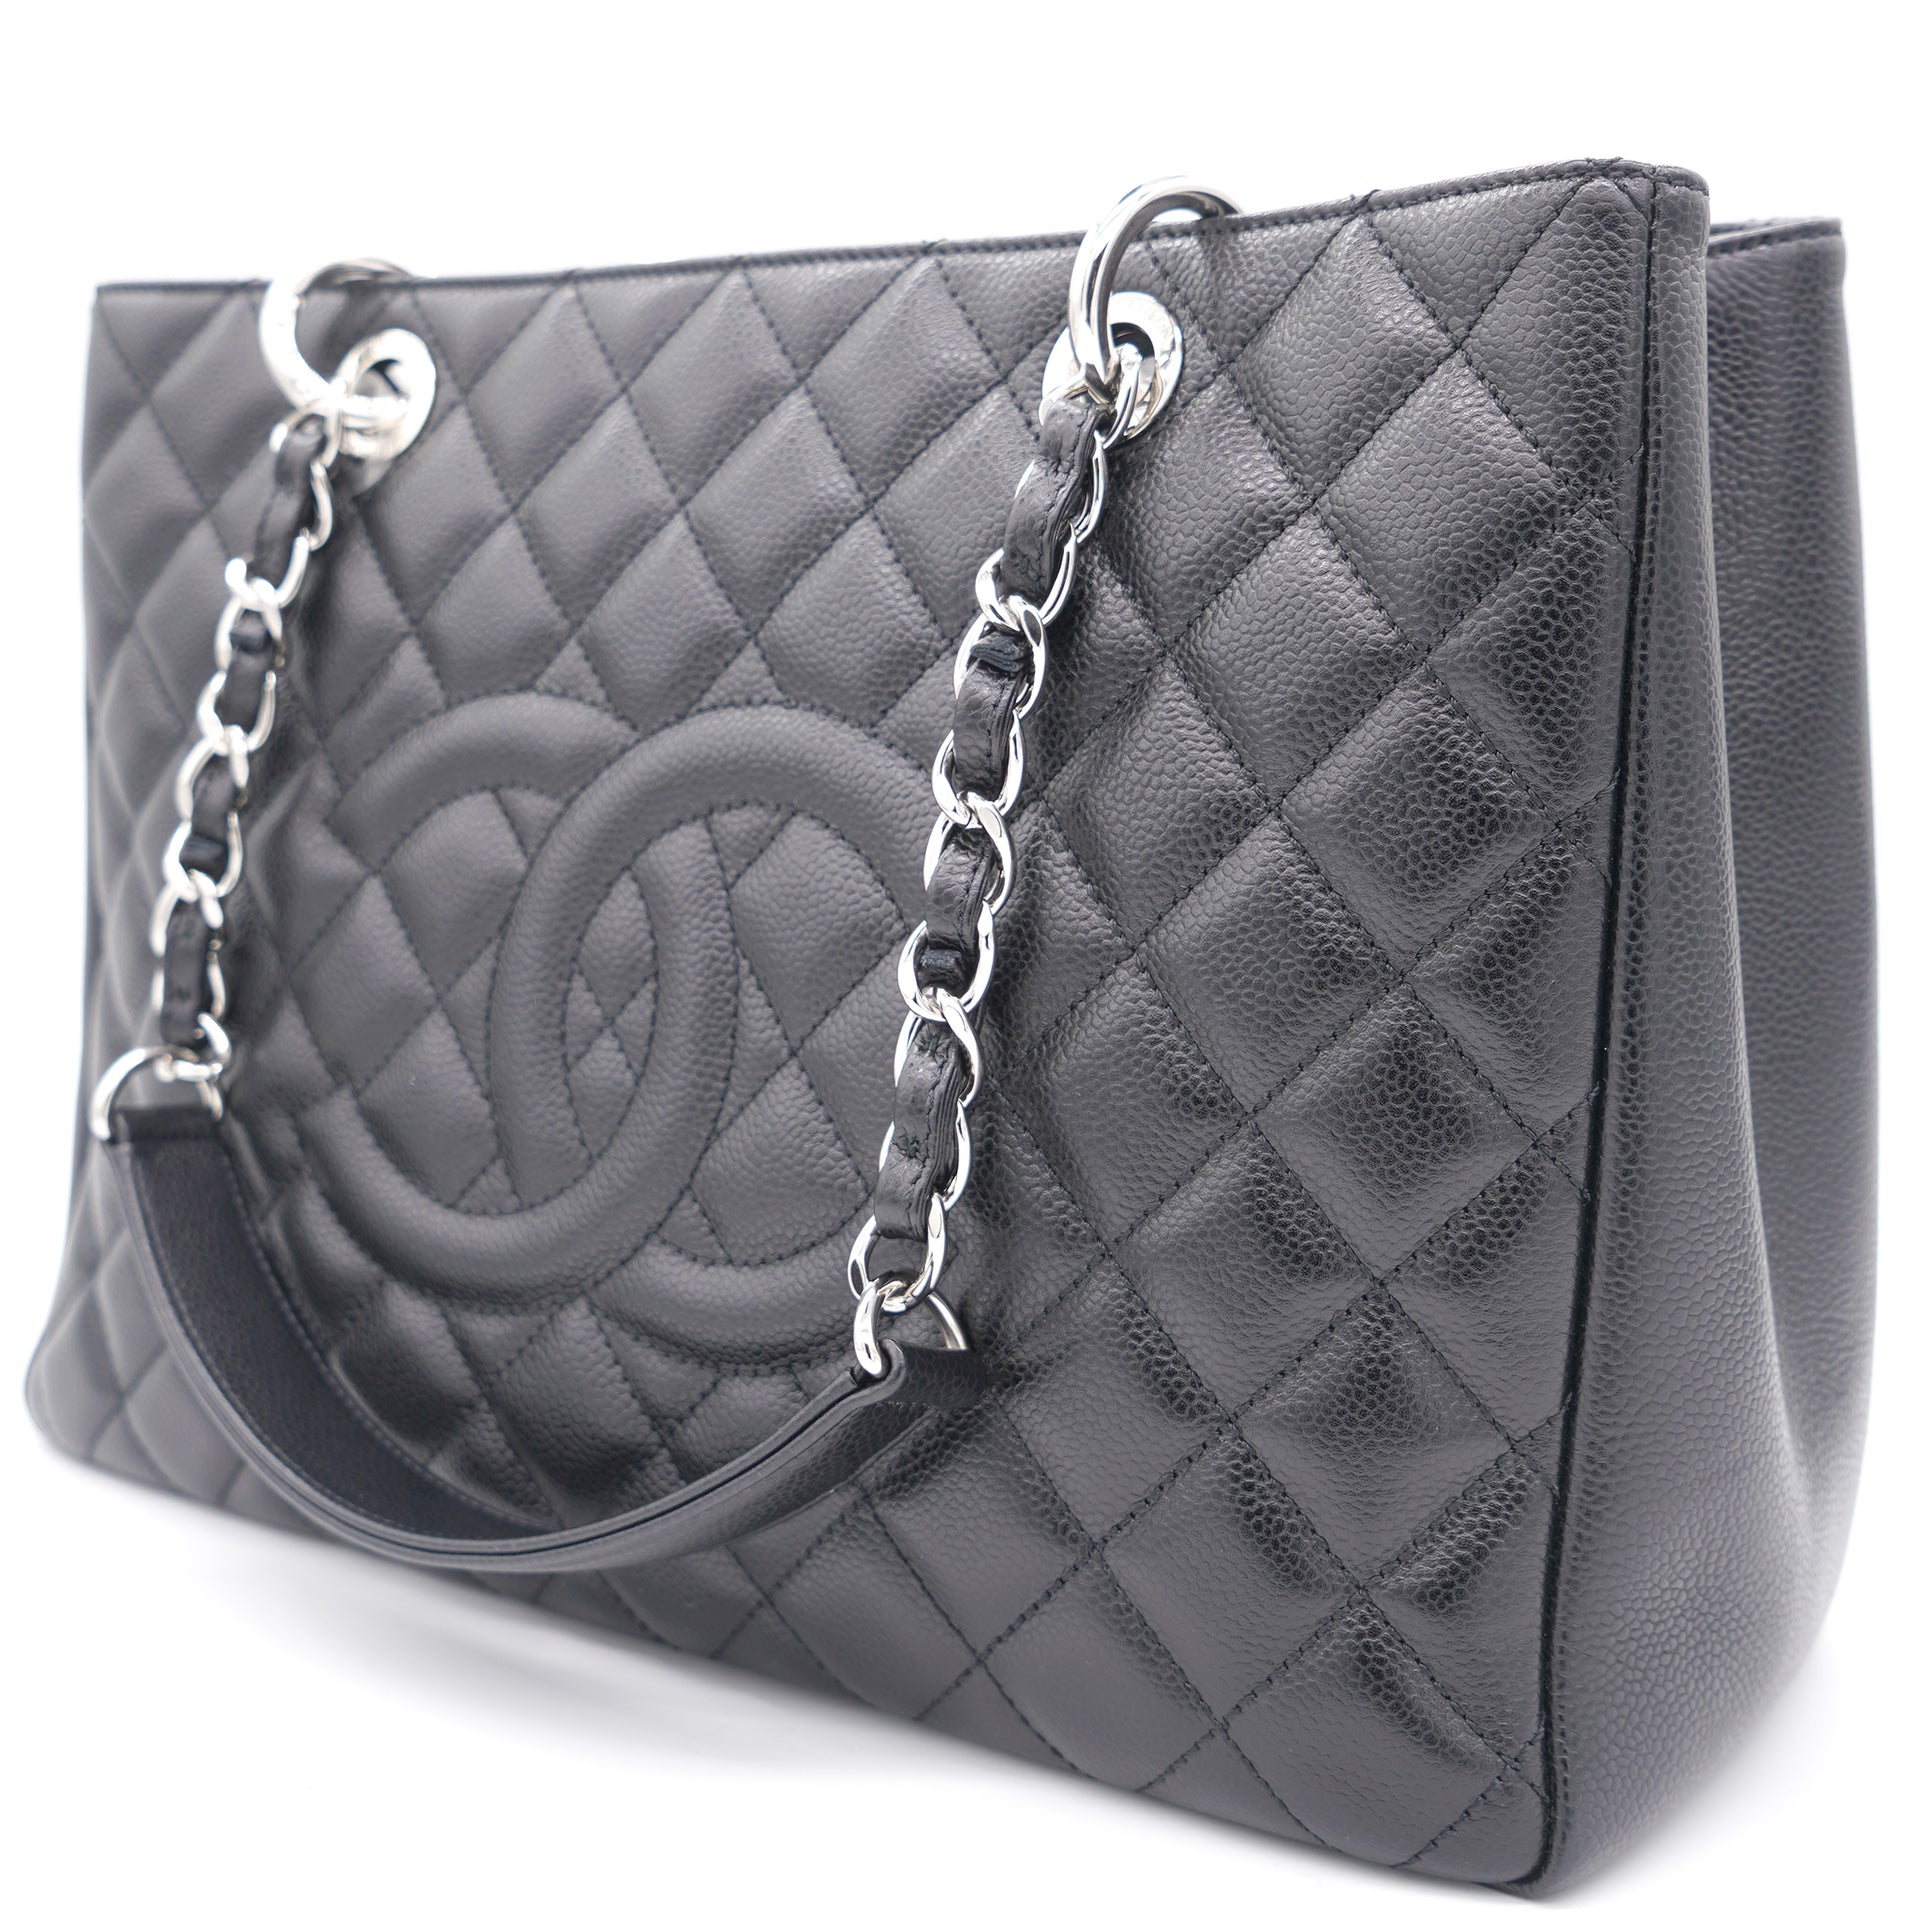 Handbags Chanel Chanel Caviar Chain Shoulder Bag Shopping Tote Black Quilted Purse